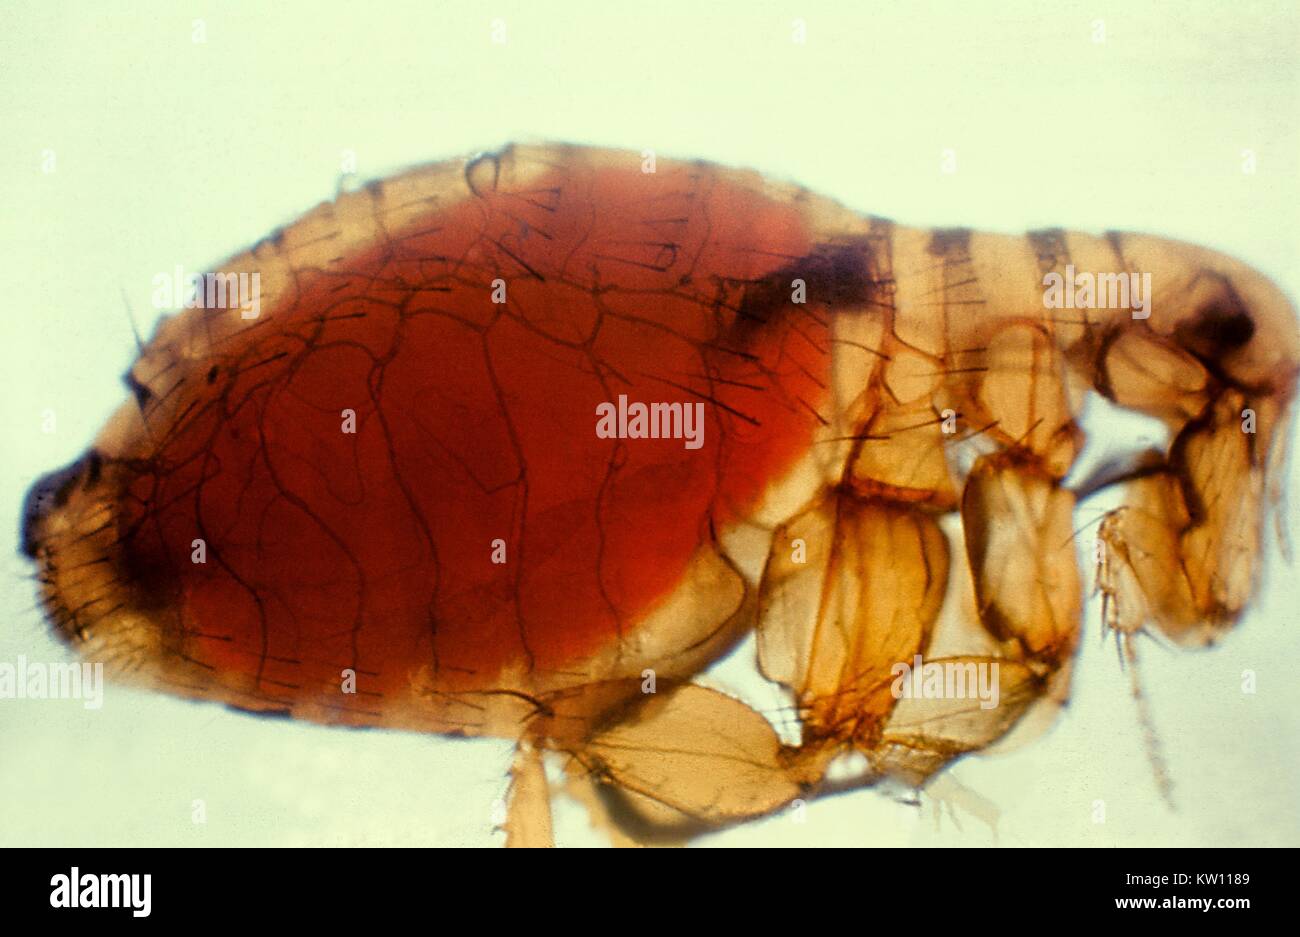 Xenopsylla cheopis, Oriental rat flea, with a proventricular plague mass. During feeding, the flea draws viable Y. pestis organisms into its esophagus, which multiply and block the proventriculus just in front of the stomach, later forcing the flea to regurgitate infected blood unto the host when it tries to swallow. Image courtesy CDC. 1981. Stock Photo